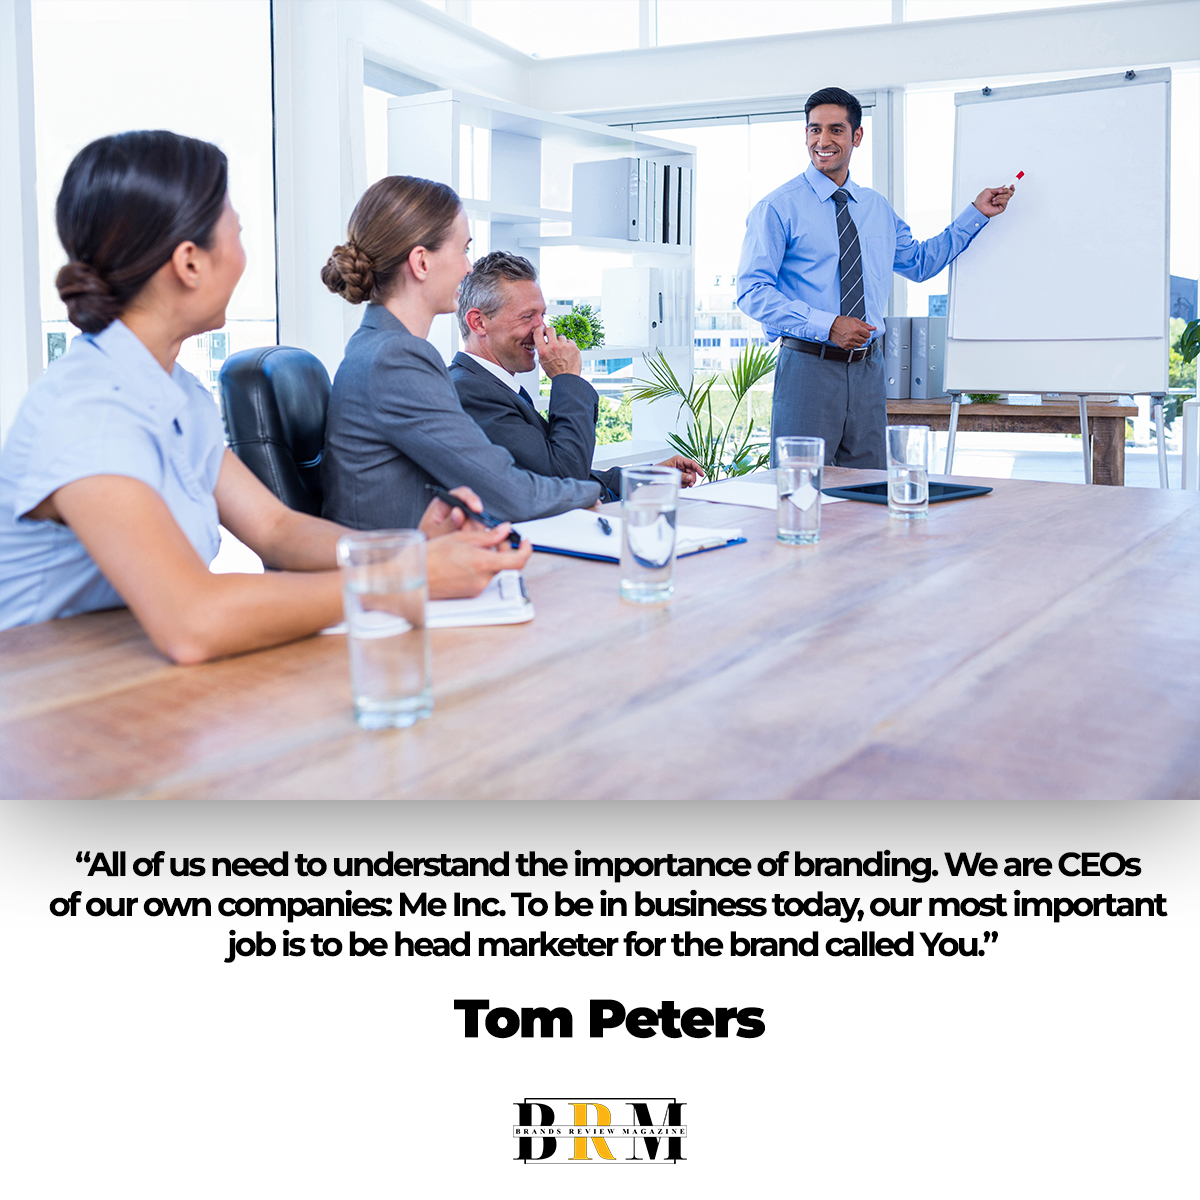 It is important for a #CEO to project #himself/herself with confidence. Visit brandsreviewmagazine.com for the latest #updates in #banking #Finance  #technology  and #lifestyle  sectors. 

#brm #branding #BusinessInnovation #businessowner #BusinessManagement